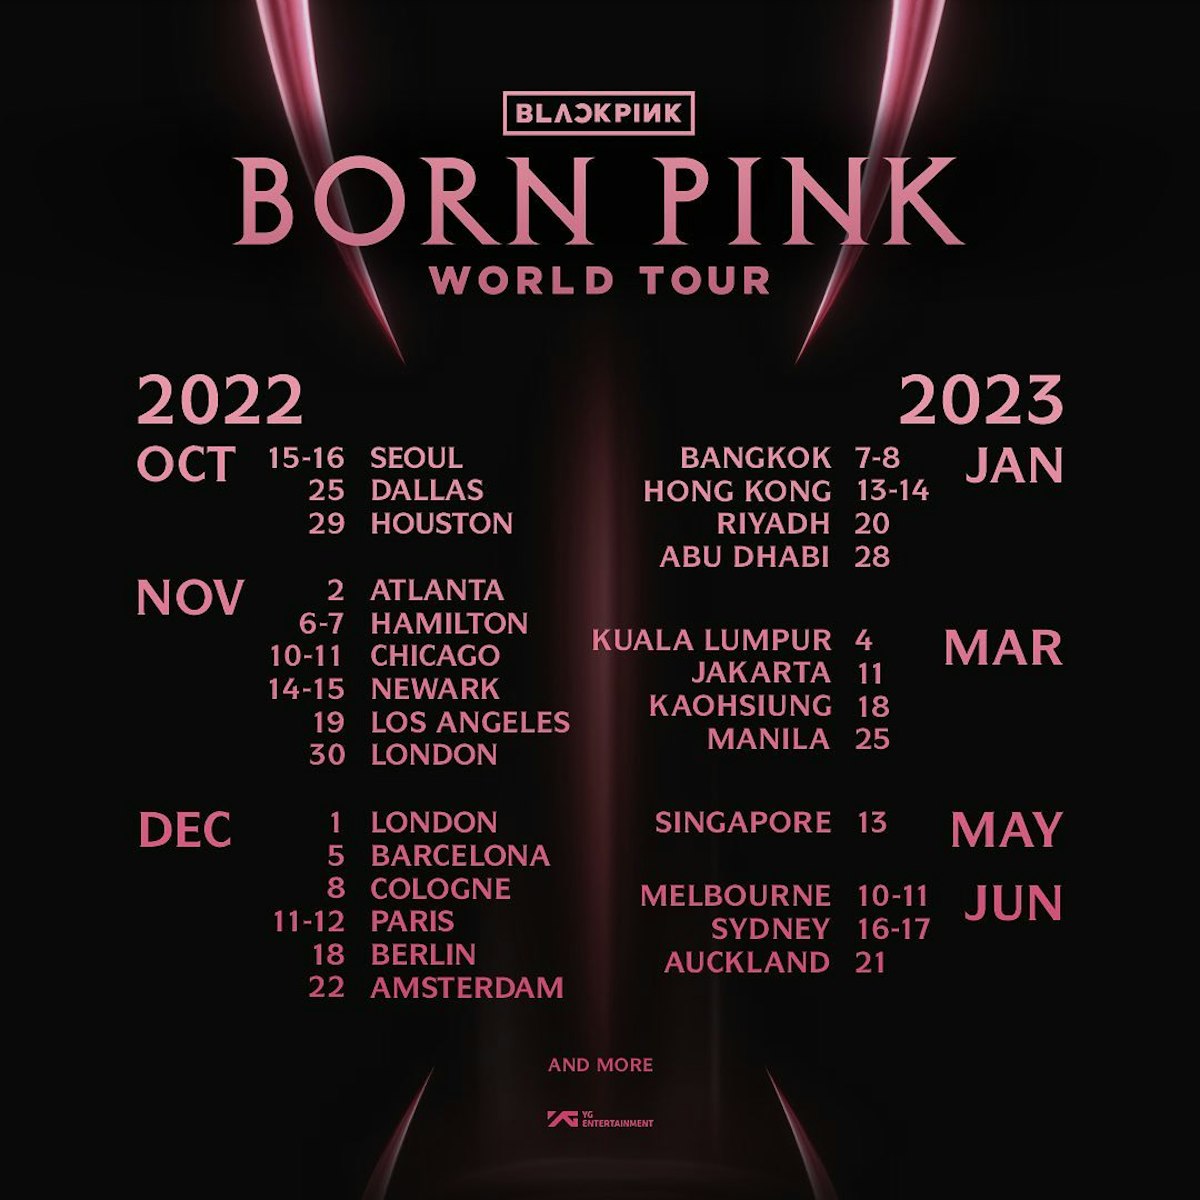 Blackpink Will Be Making Their Comeback in Manila in 2023